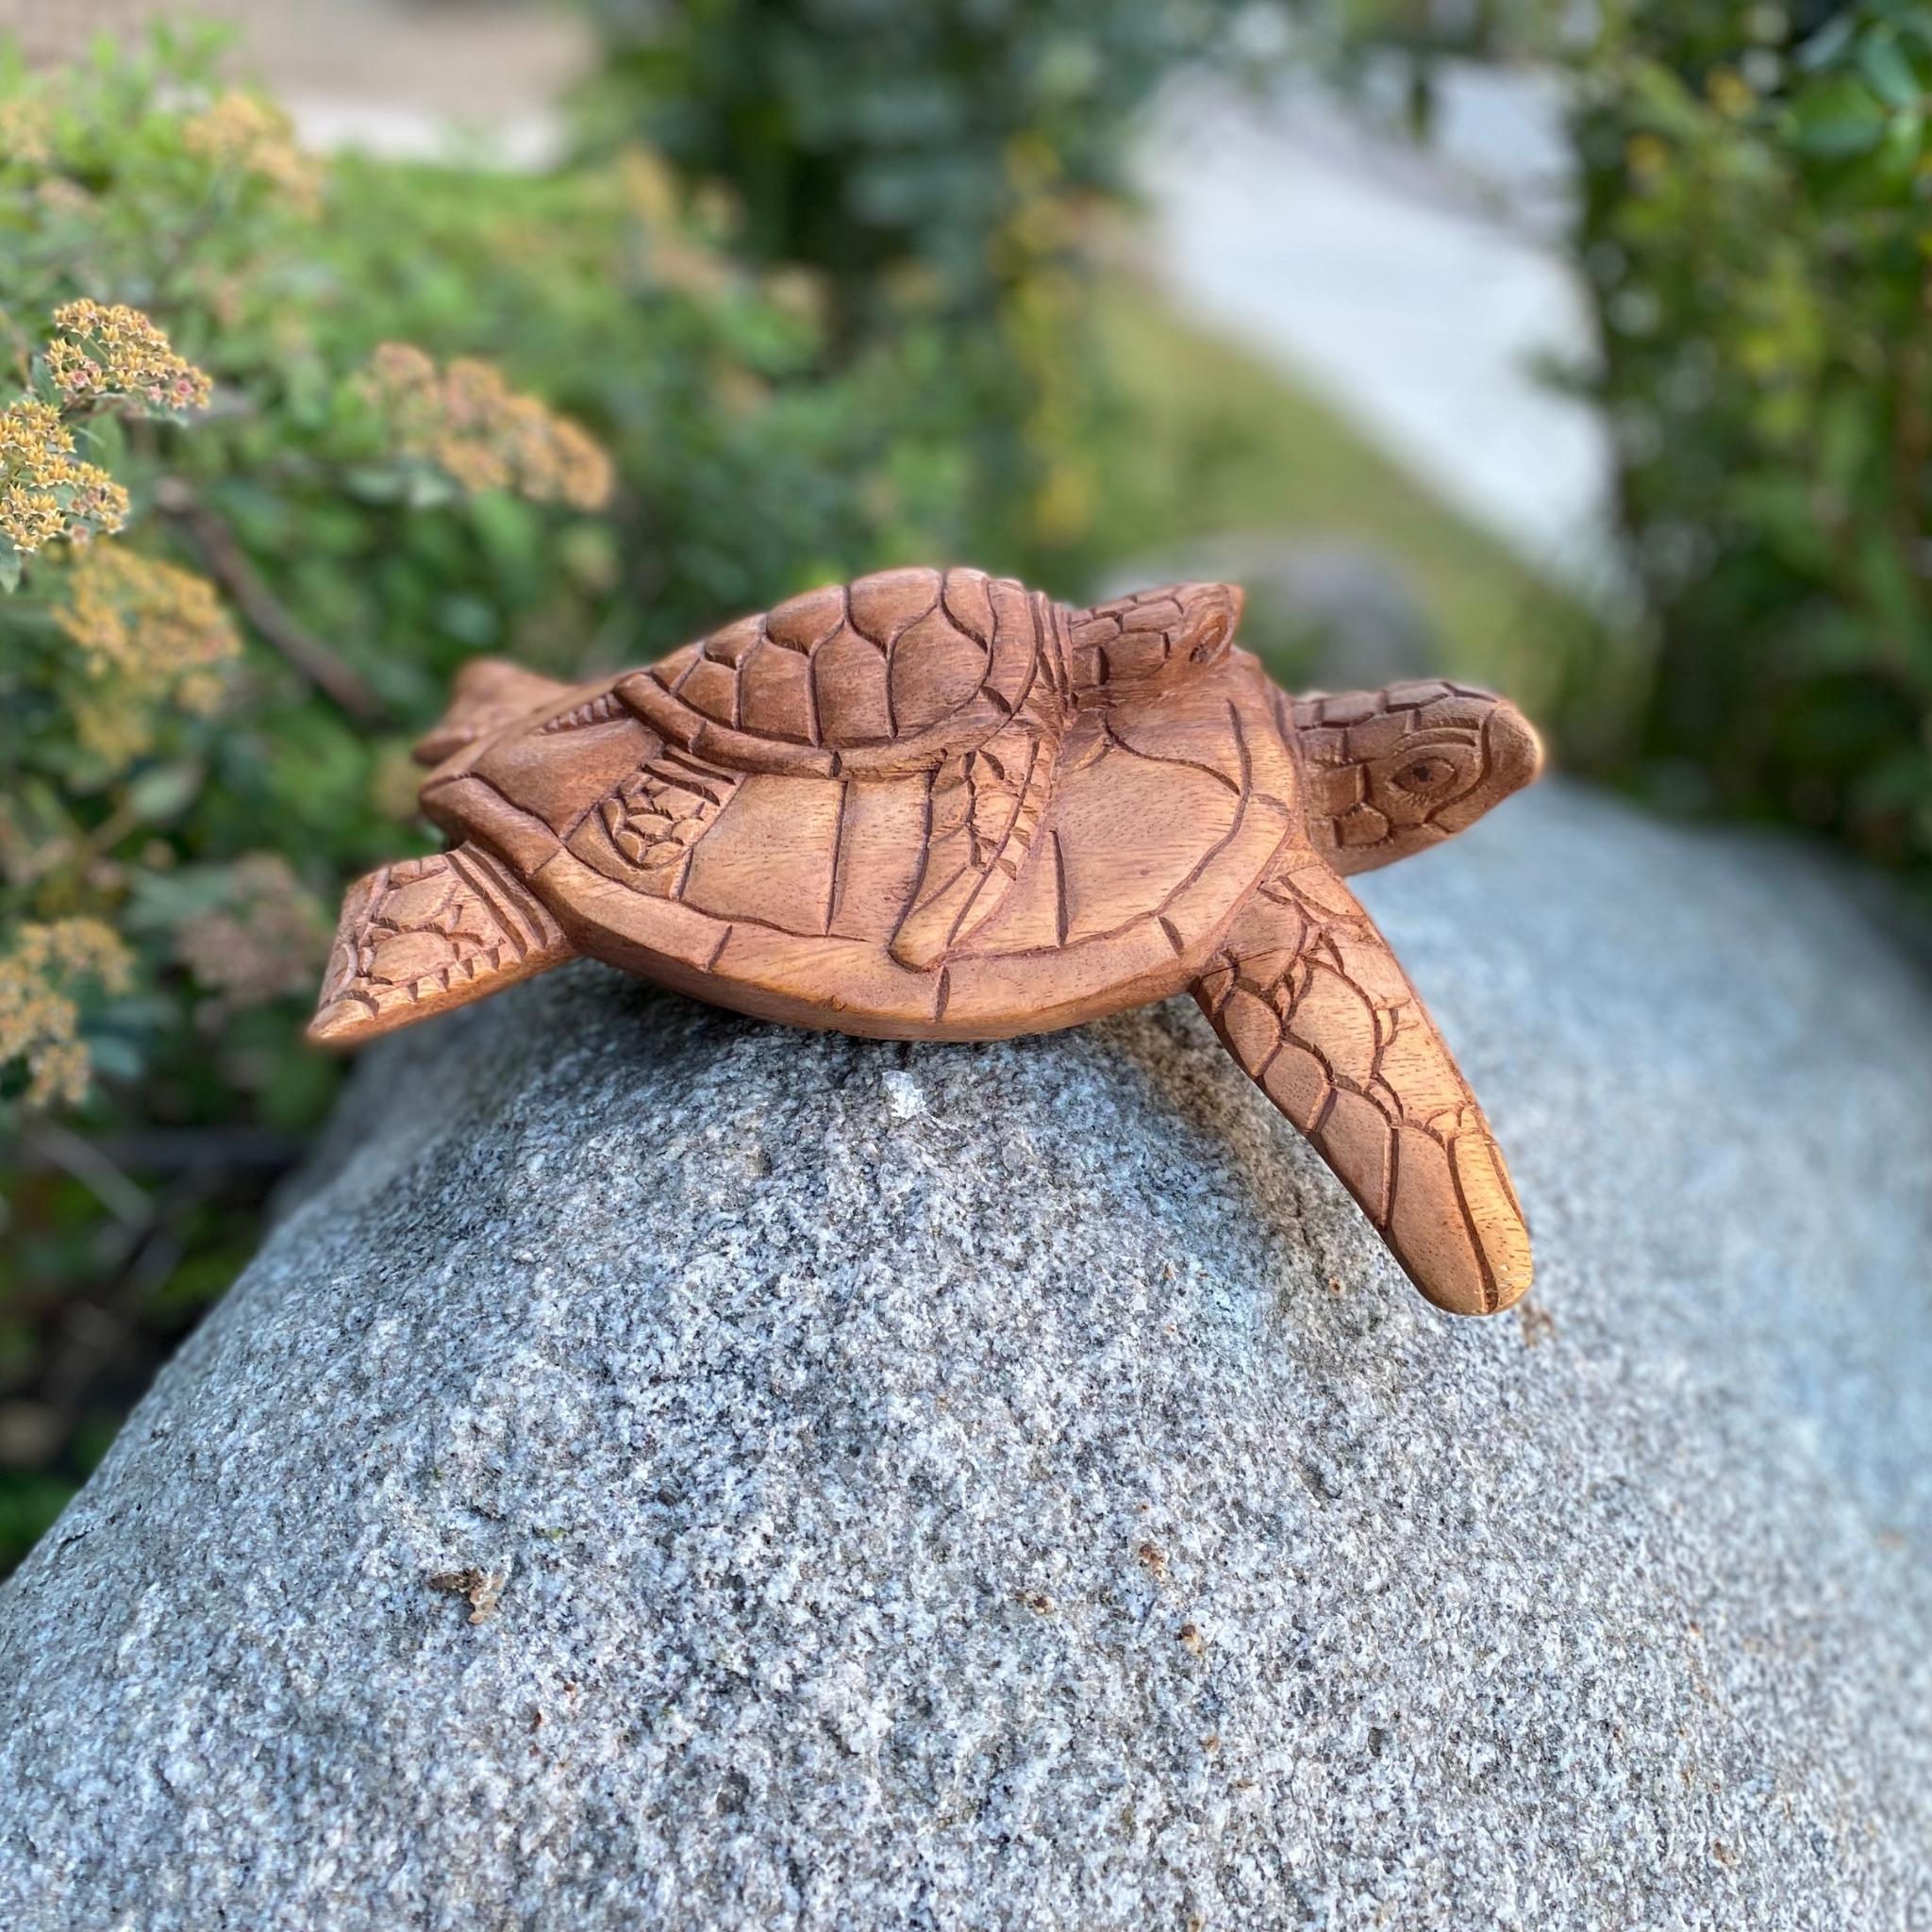 Wooden Tortoise Home Decor Sculpture Statue Turtle Mother with Baby Solid Sea Turtle Sculpture from Indonesia Hand Carved Turtle Figurine - Tobmarc Home Decor & Gifts 